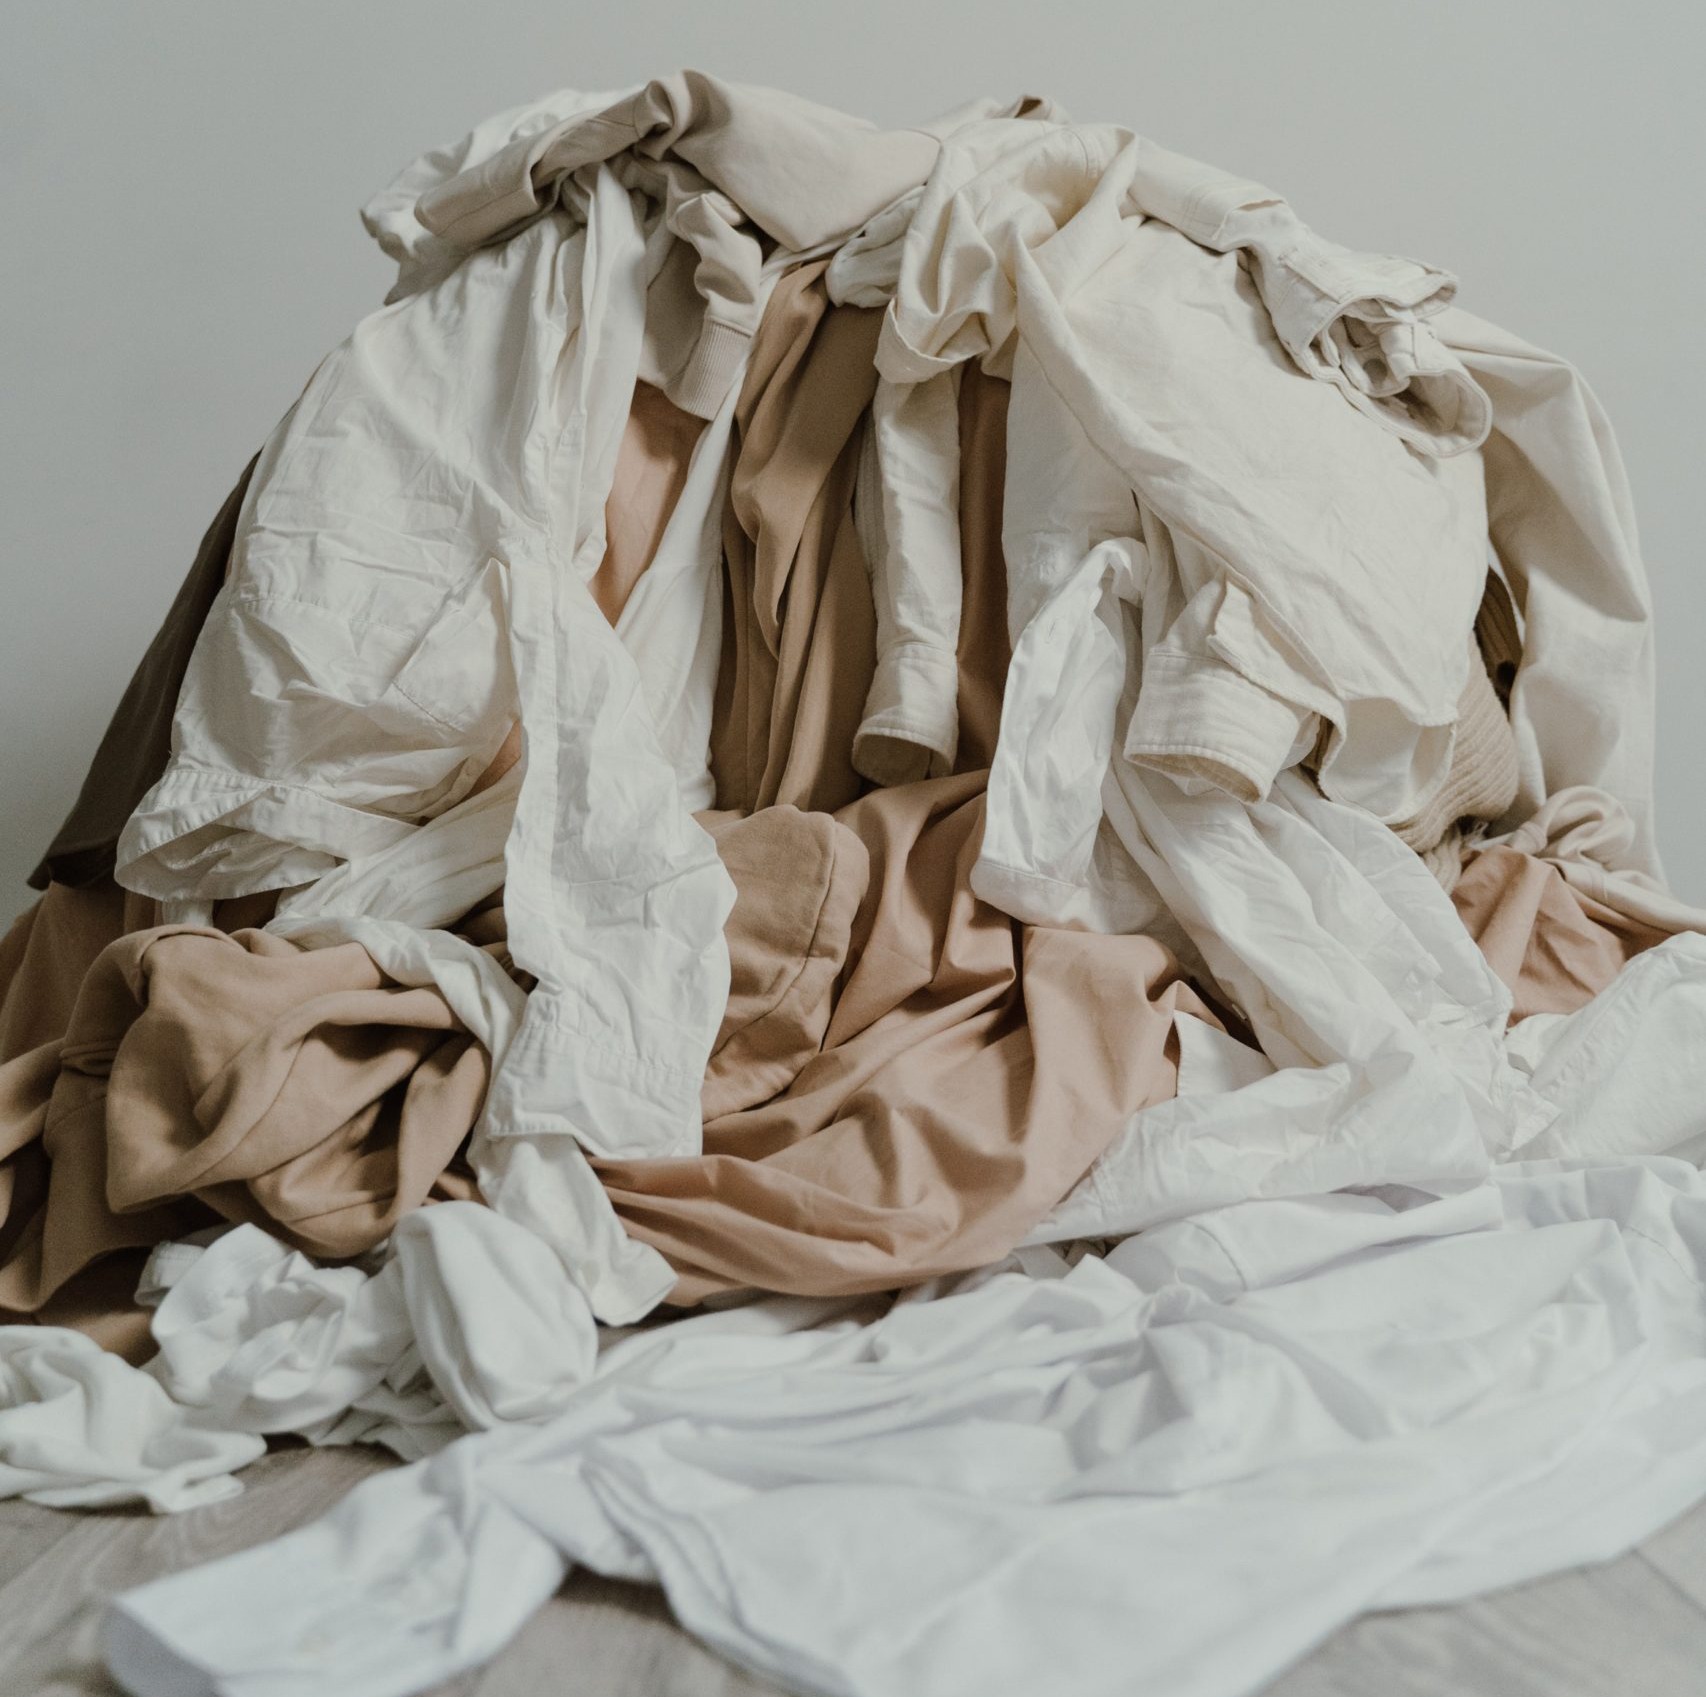 heap-of-clothes-and-fabric